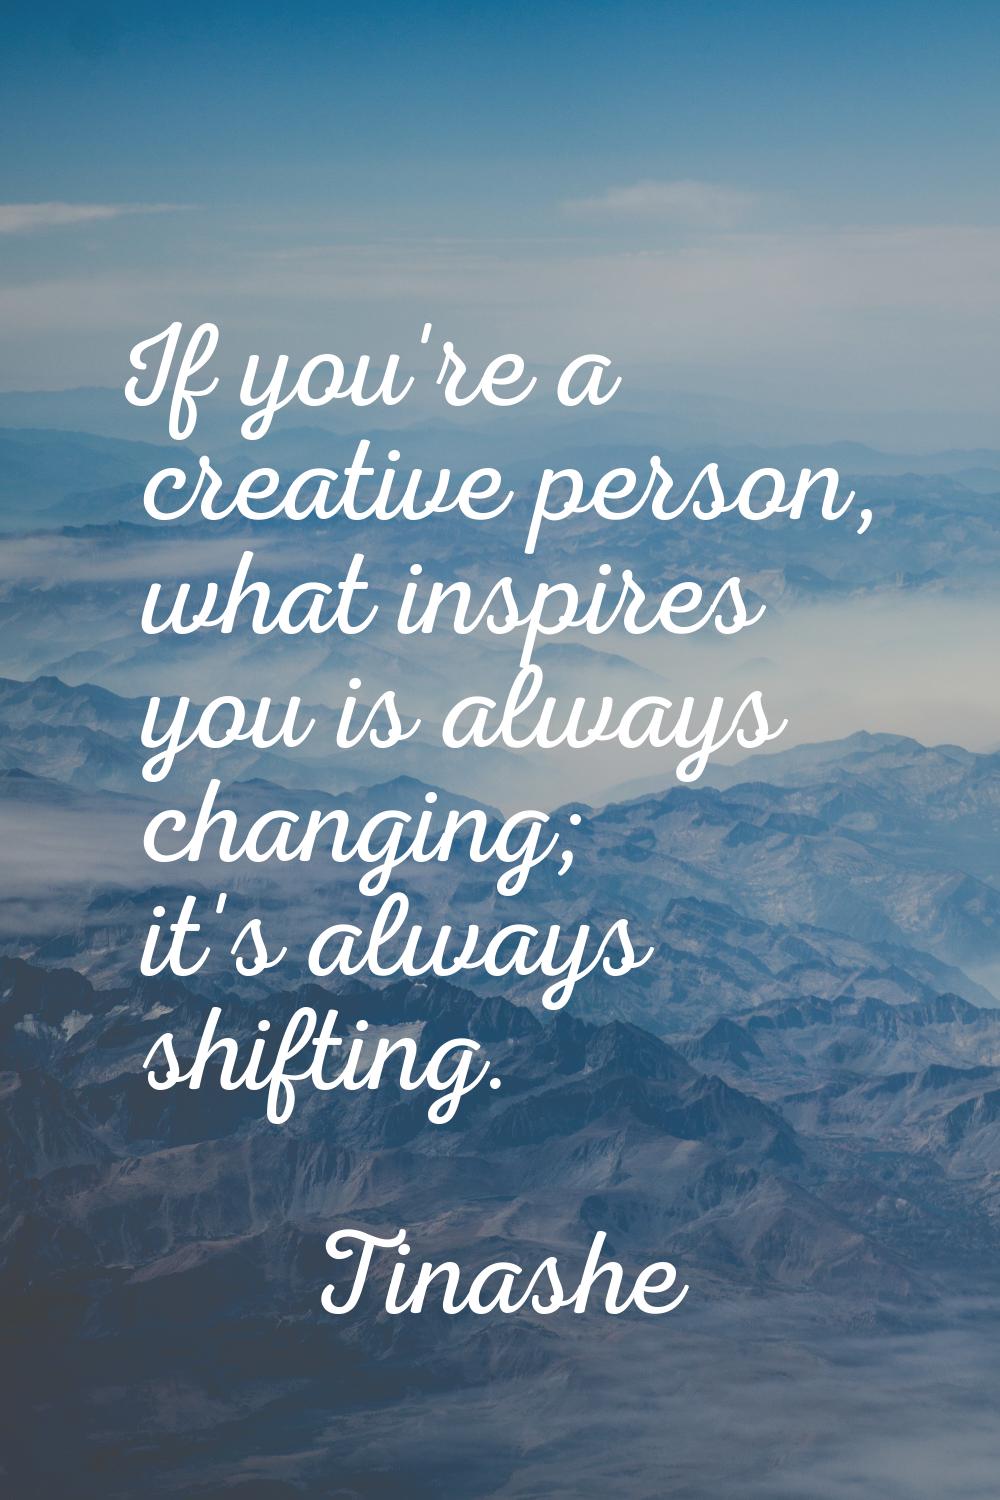 If you're a creative person, what inspires you is always changing; it's always shifting.